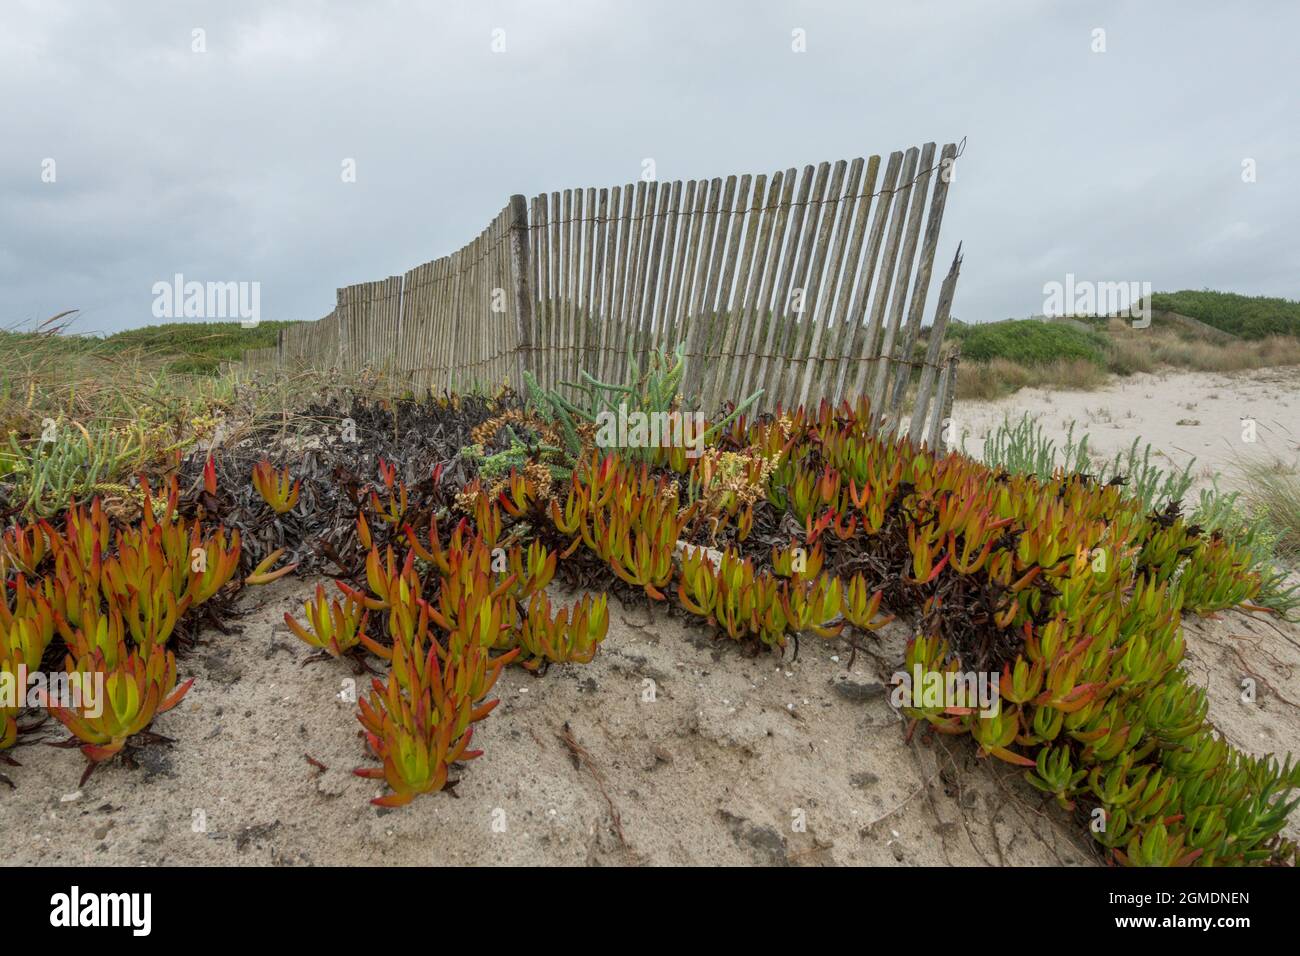 Ice plants, Carpobrotus edulis, growing on a beach covering the sand in Portugal. Stock Photo